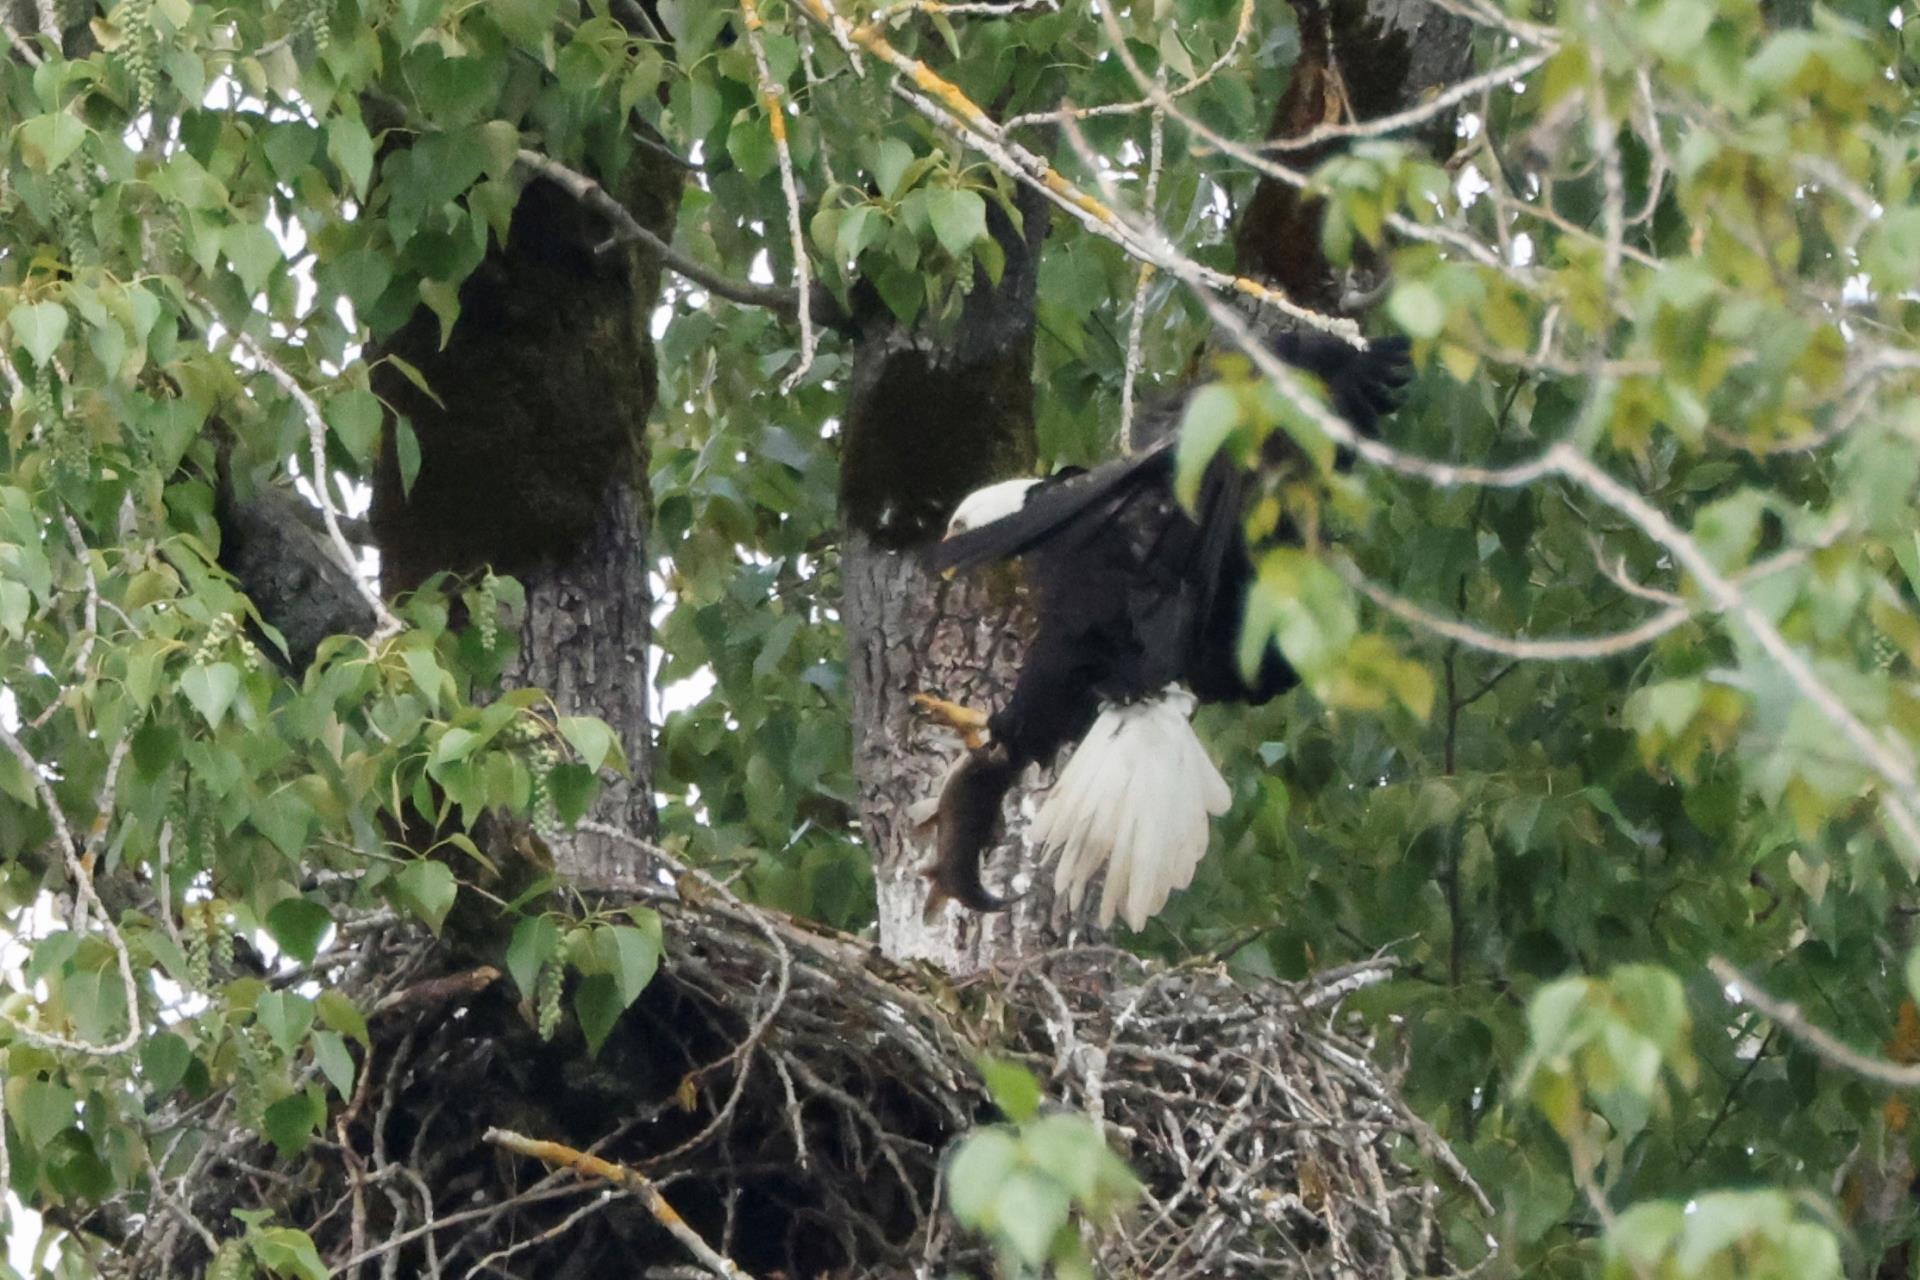 Adult eagle landing at nest with fish